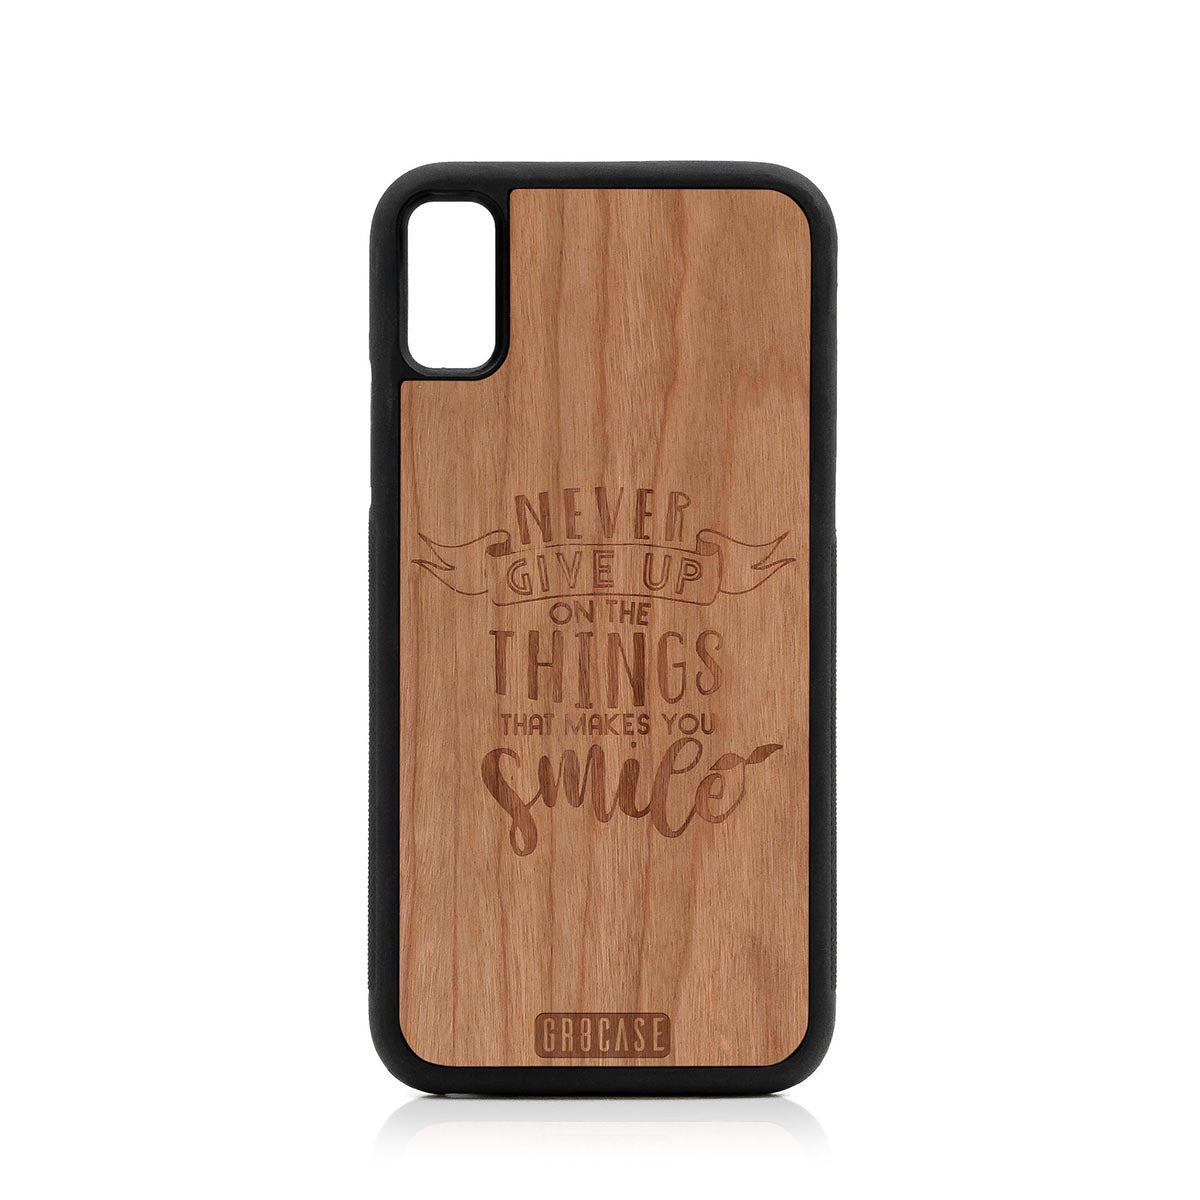 Never Give Up On The Things That Makes You Smile Design Wood Case For iPhone X/XS by GR8CASE